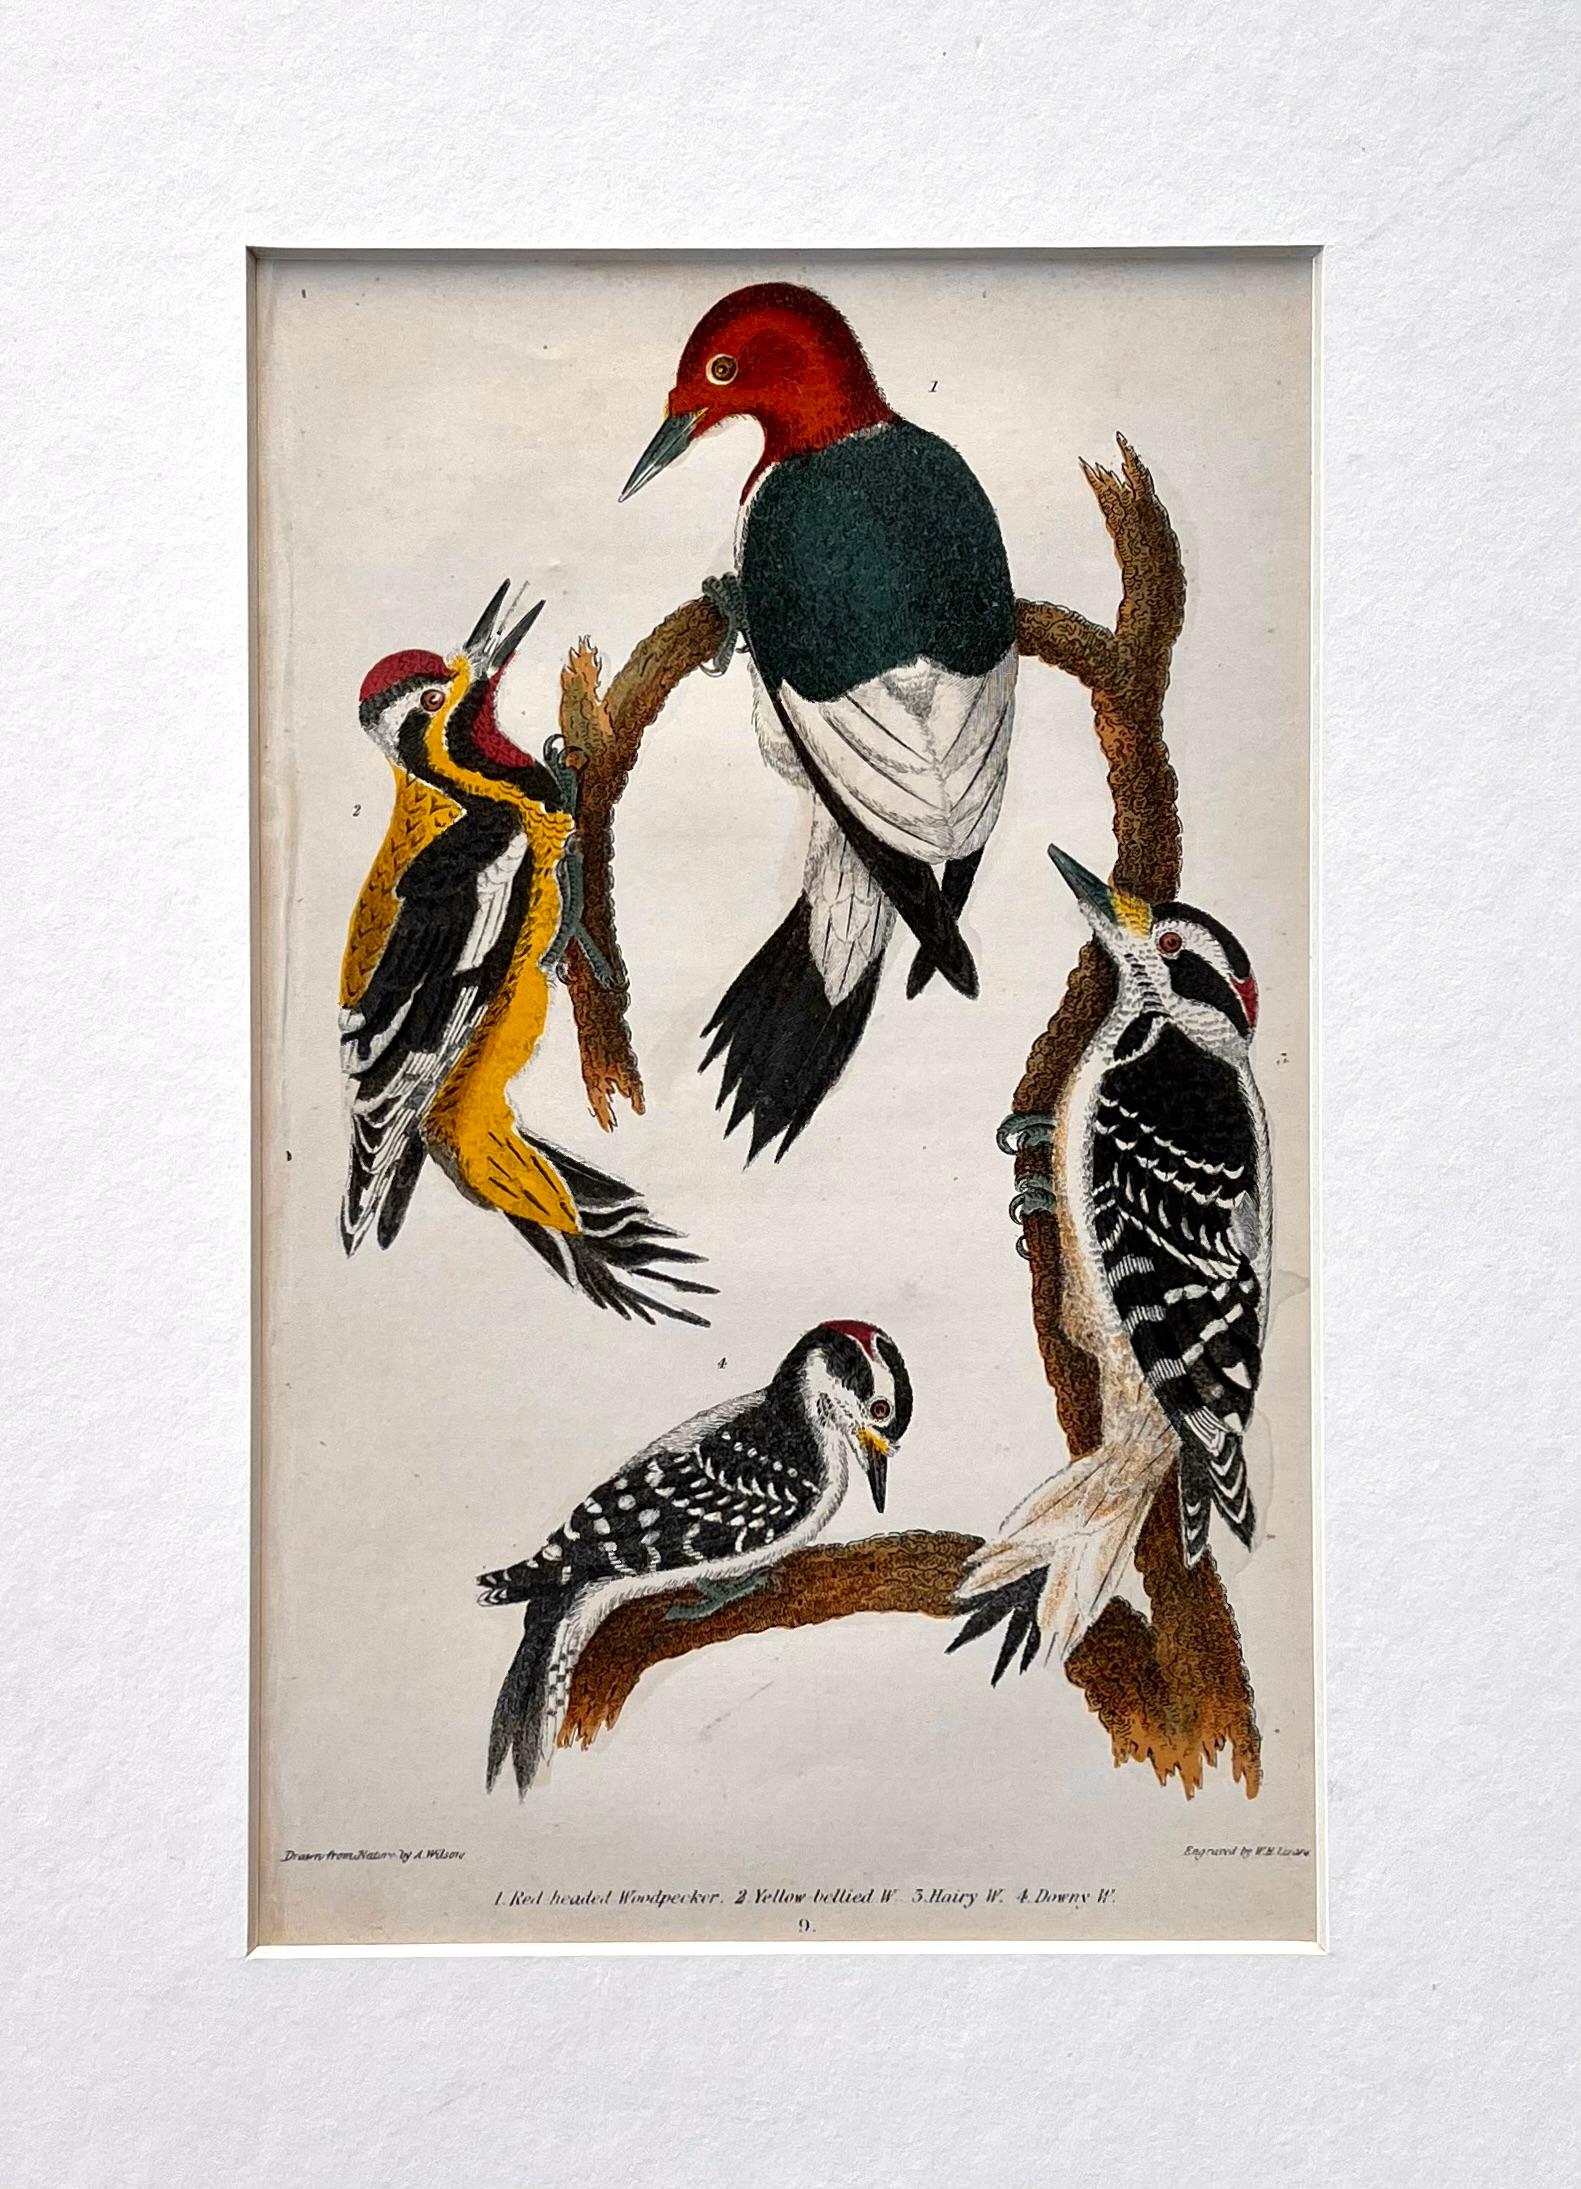 Matted Print of:

1. Red headed Woodpecker. 2. Yellow bellied W. 3 Hairy W. 4. Downy W.

Subscript: Lower Left: Drawn from Nature by A. Wilson.; Lower Center: 9.; Lower Right: Engraved by W. H. Lizars.

Artist: Alexander Wilson

Engraver: W. H.